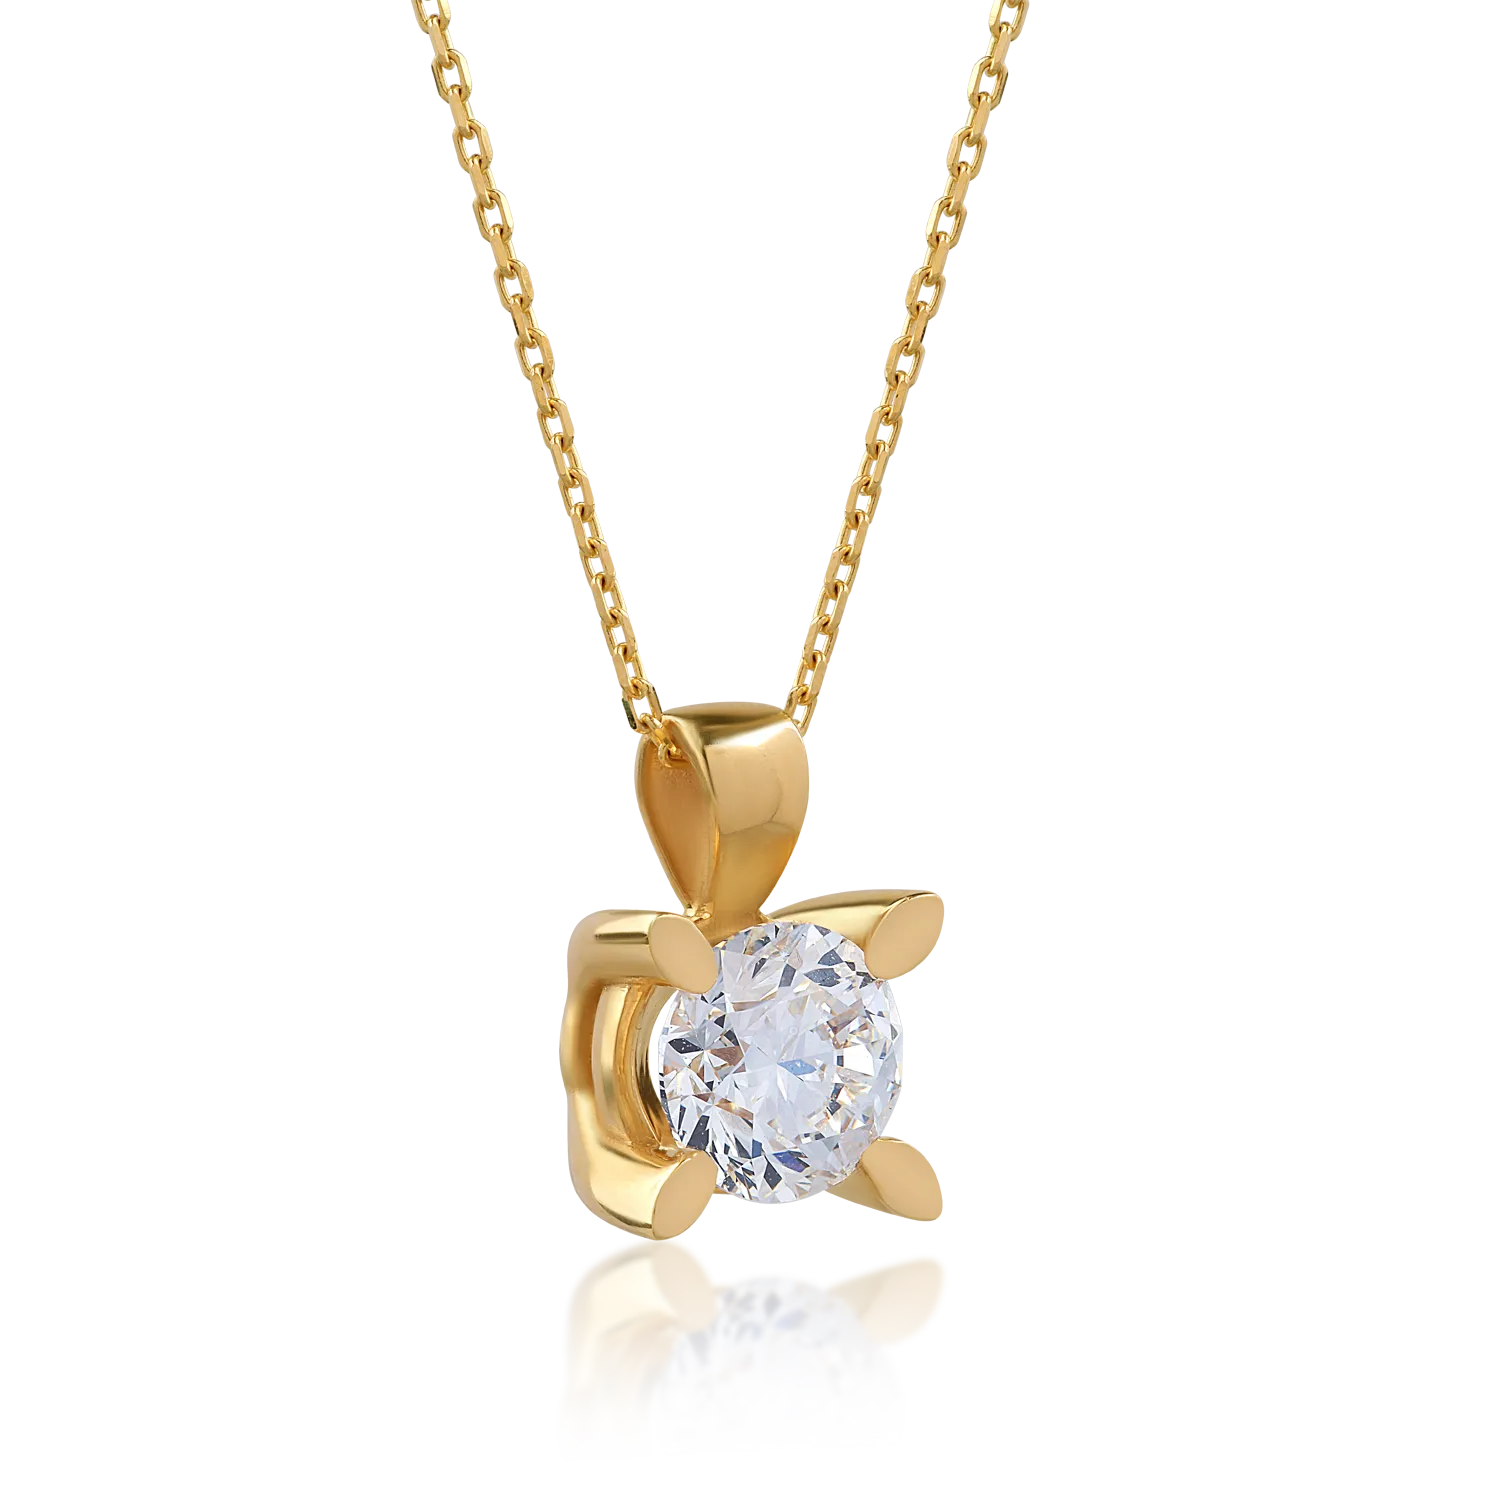 18K yellow gold pendant necklace with 1ct diamond